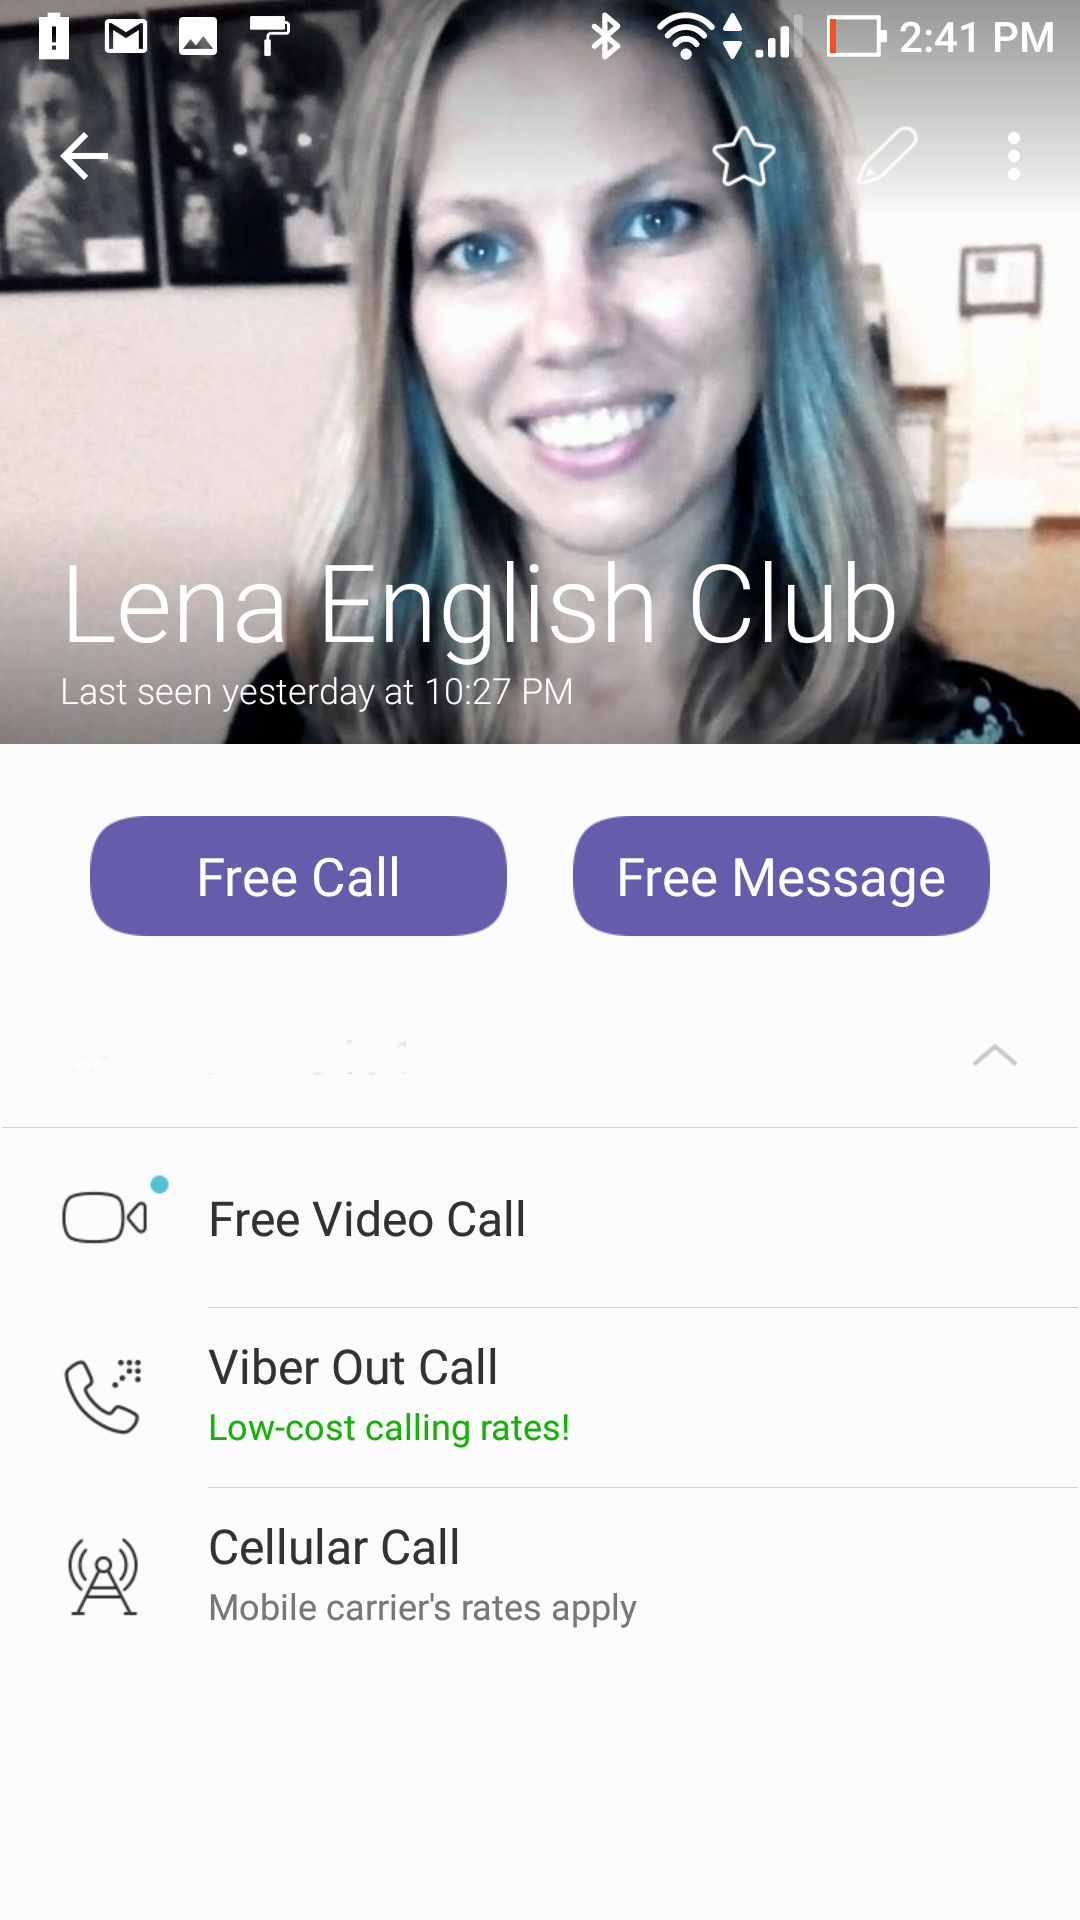 how to use viber in uae without vpn service